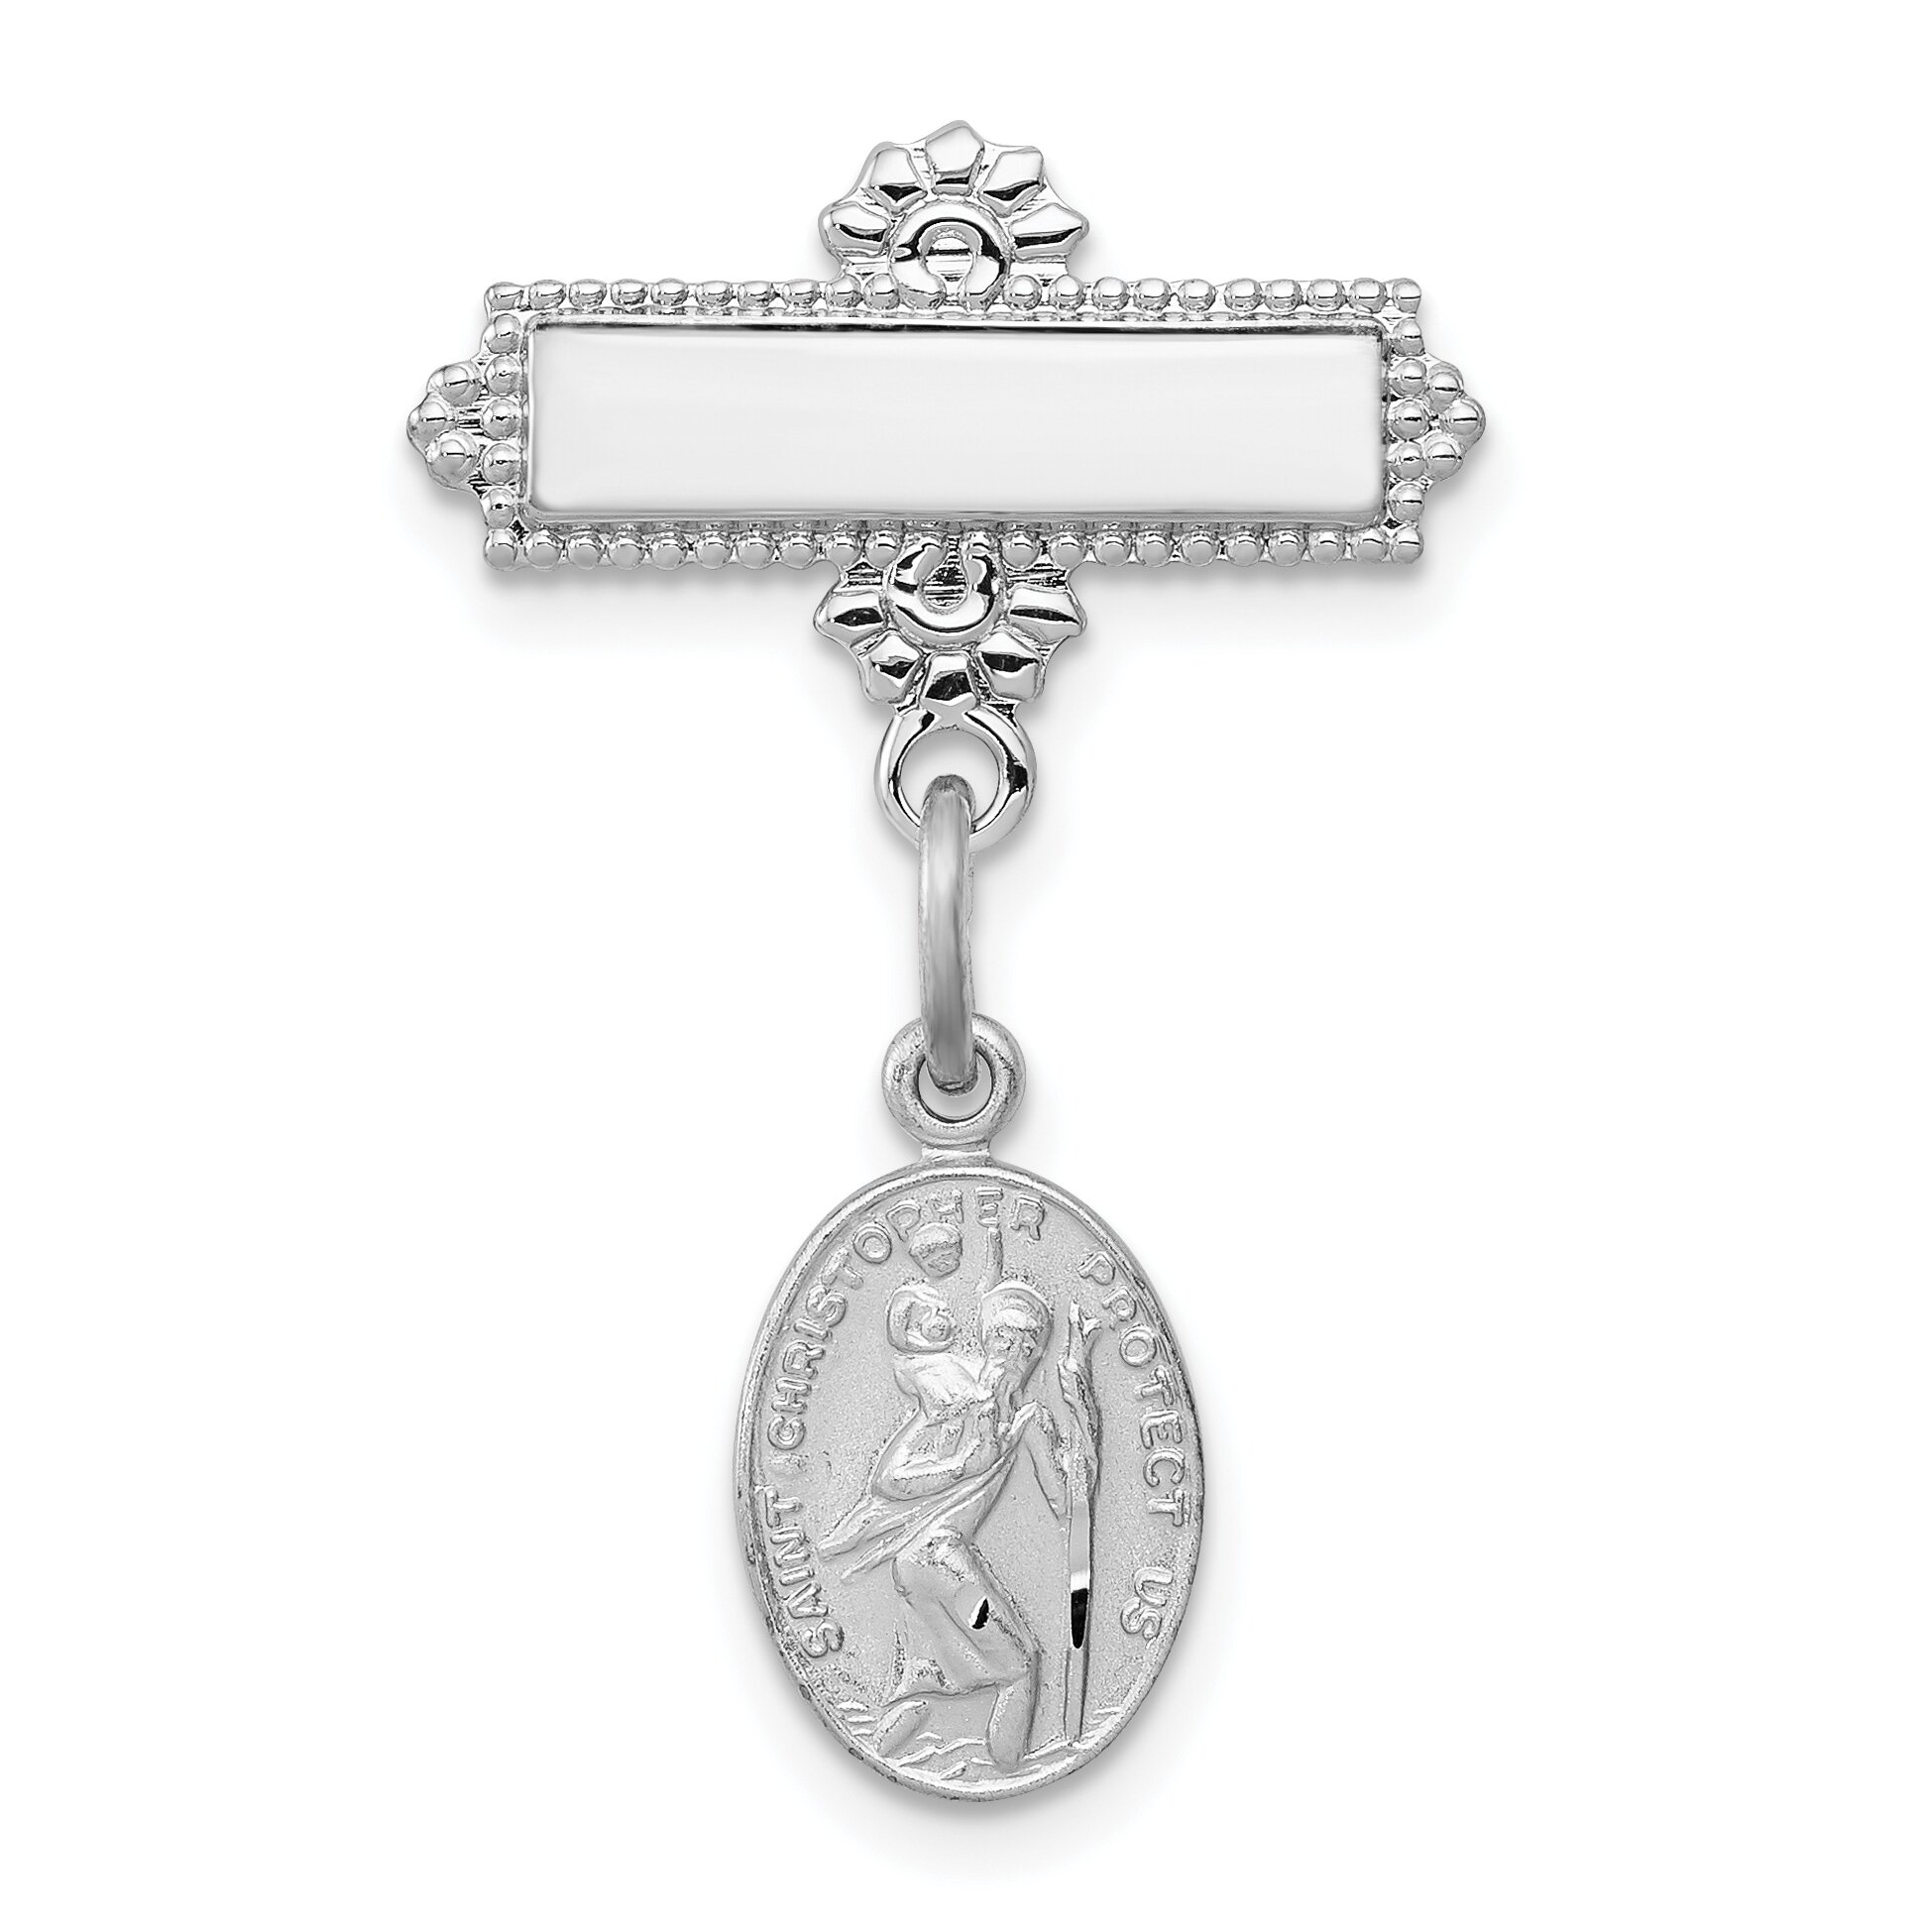 Findingking Sterling Silver Oval Saint Christopher Medal Pin